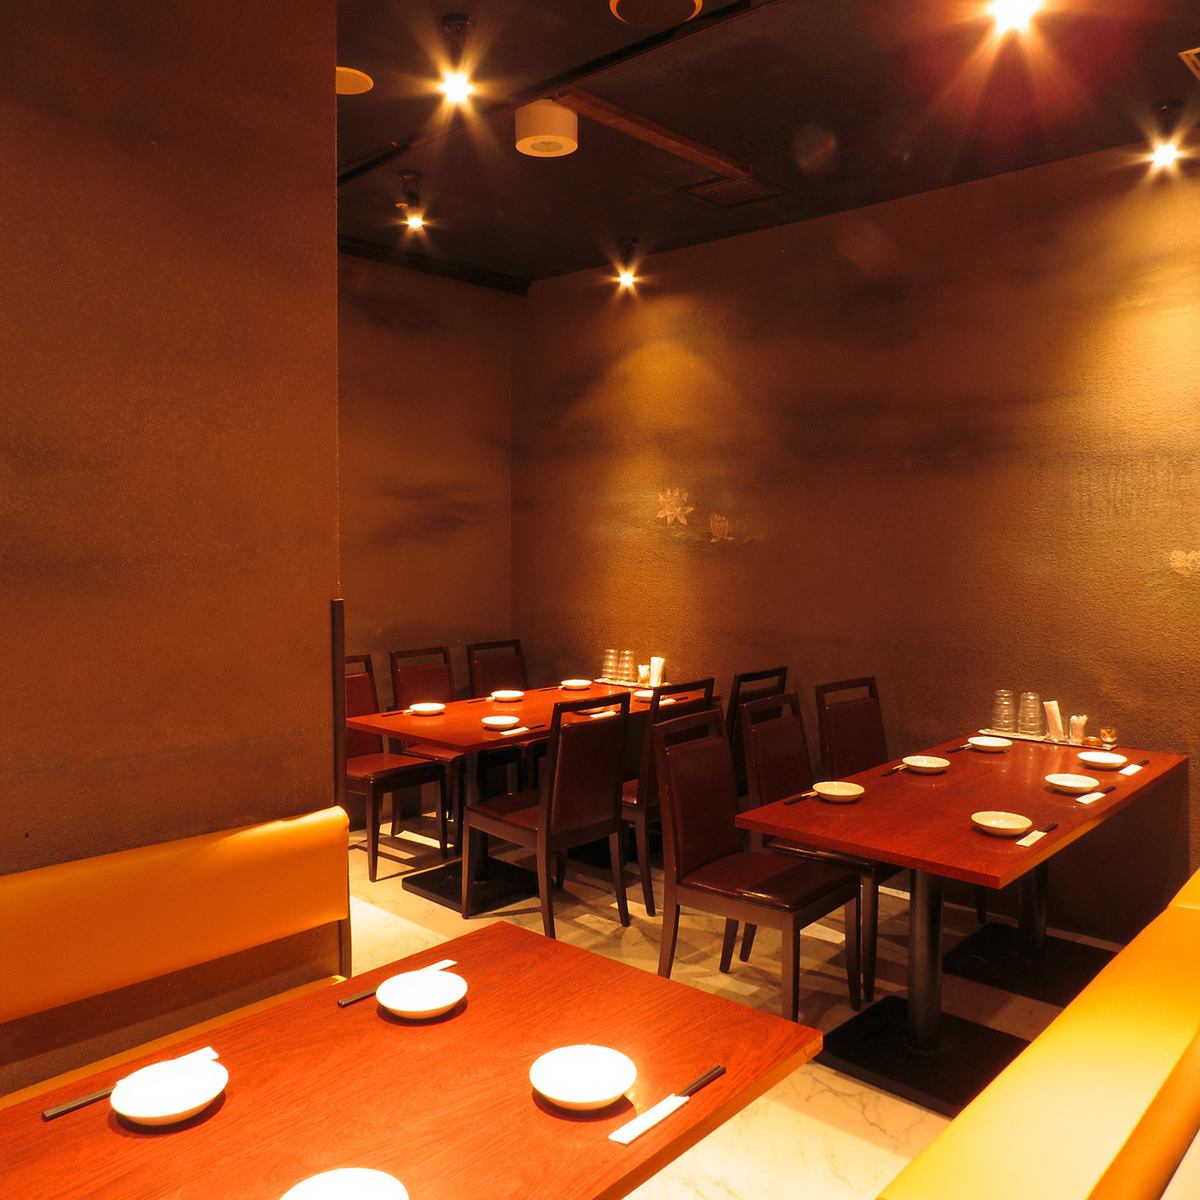 We have a private room with a sunken kotatsu that can accommodate up to 14 people!